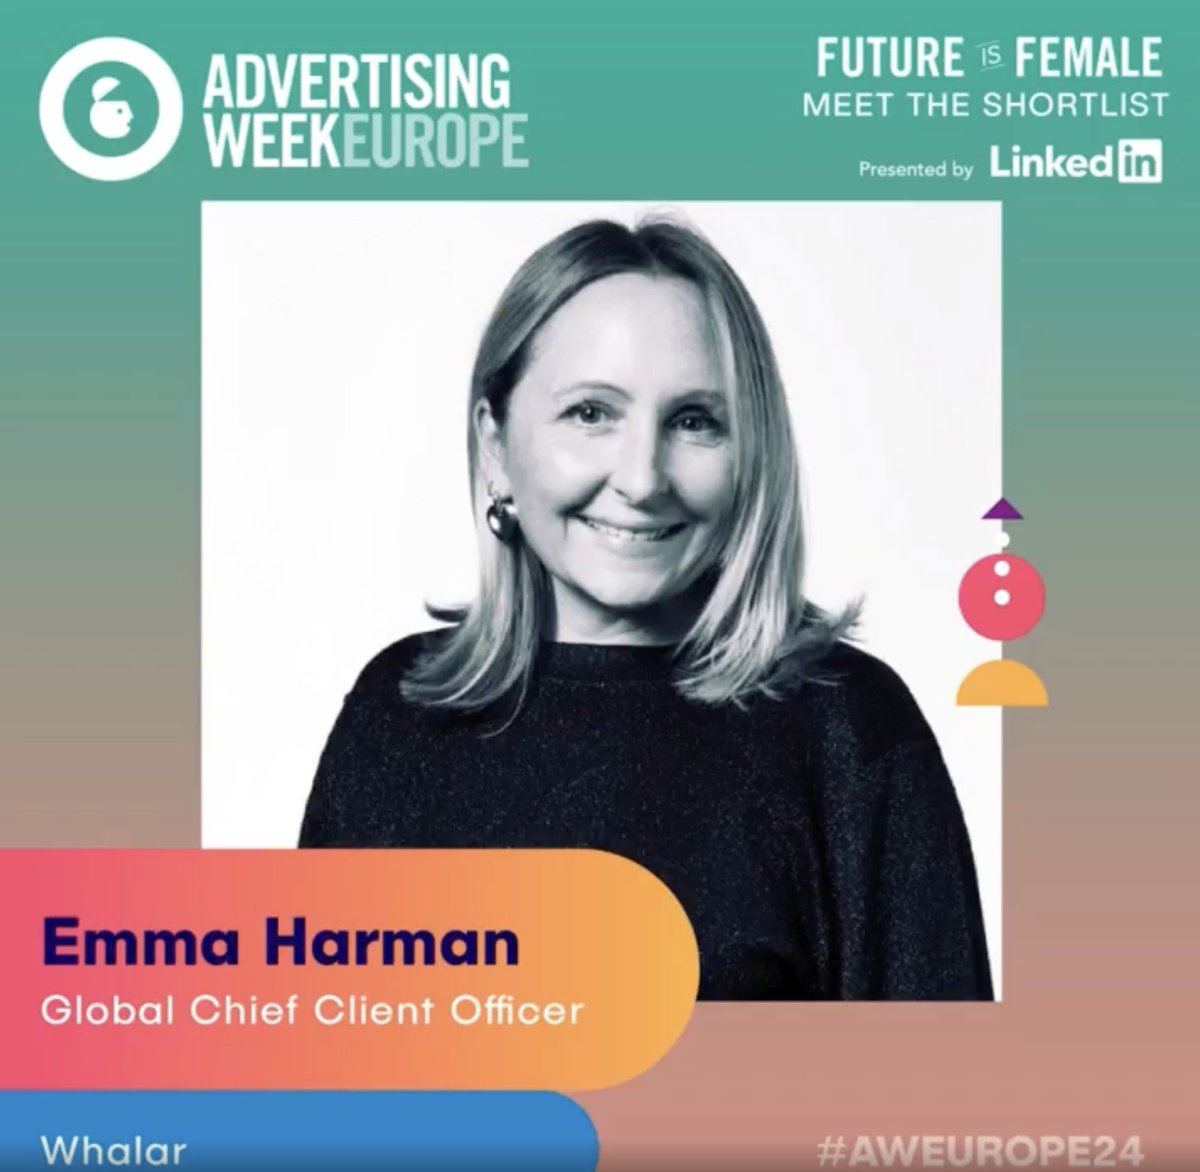 I spy our very own Emma Harman on @AdvertisingWeek Europe's 2024 Future is Female Short List - presented in partnership with @LinkedIn! 🙌⚡

Huge congrats, Emma!

#Whalar #AWEurope2024